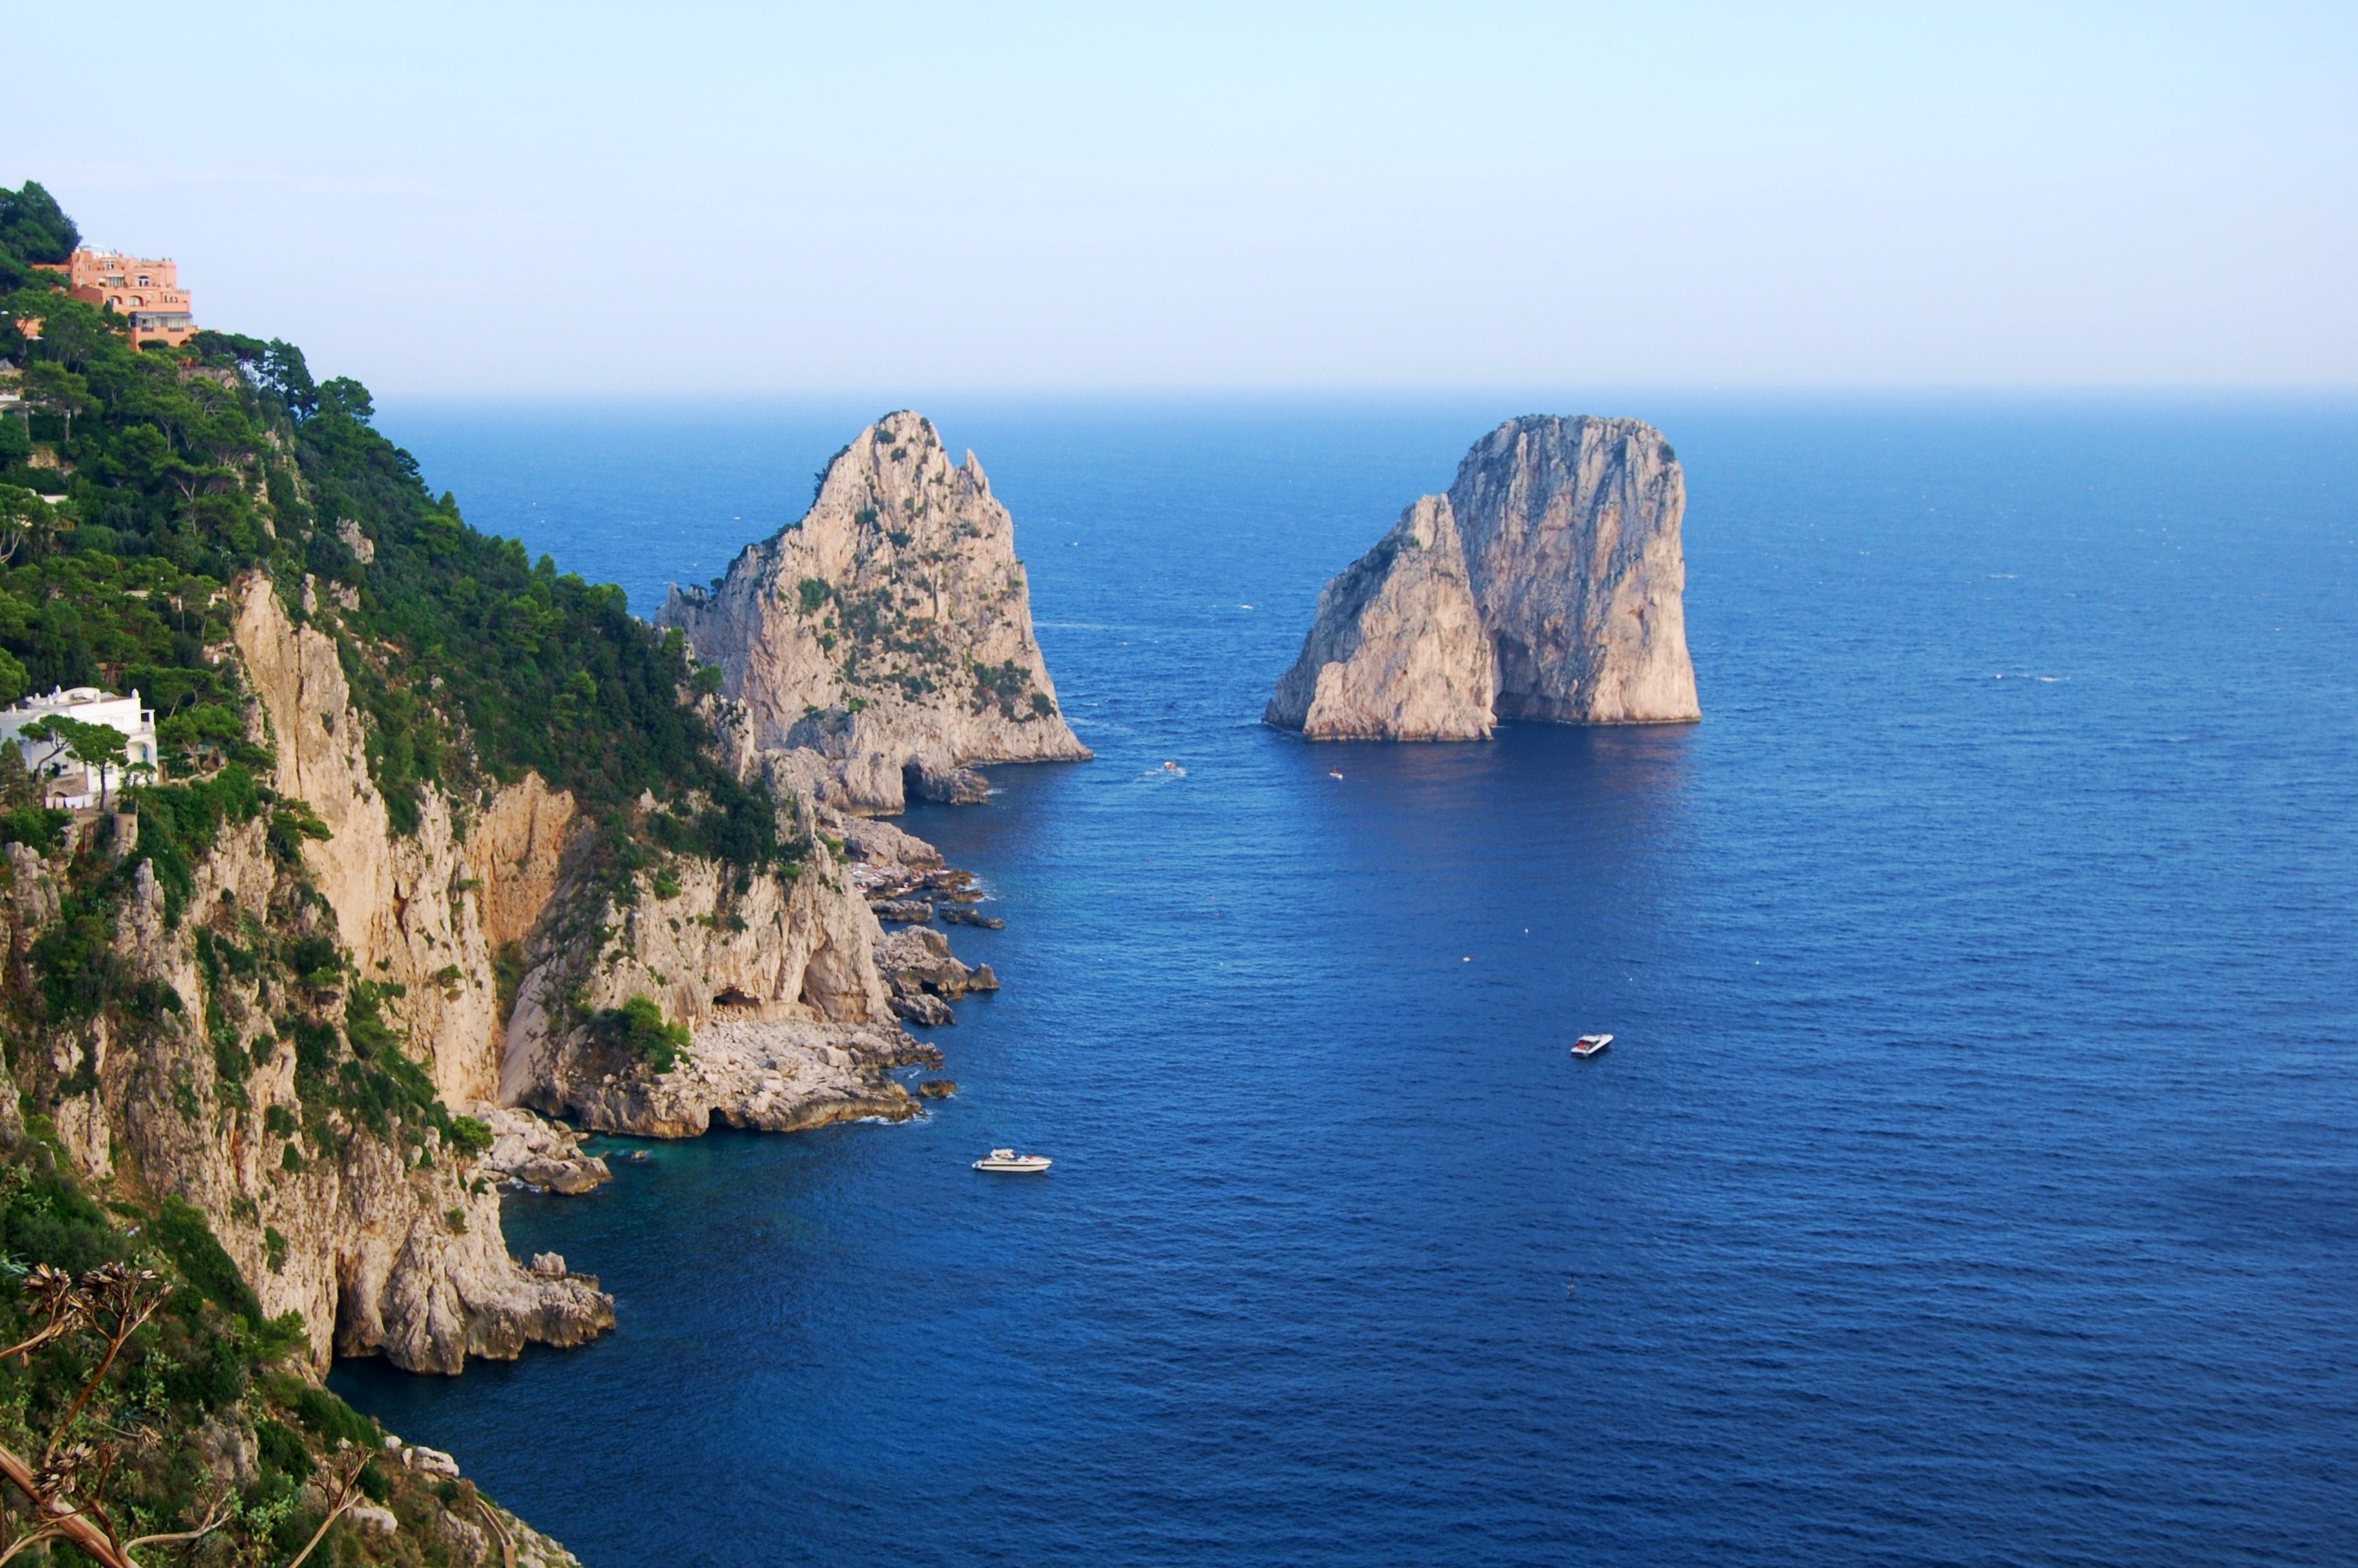 Private Tour to Capri and Anacapri with Blue Grotto from Naples